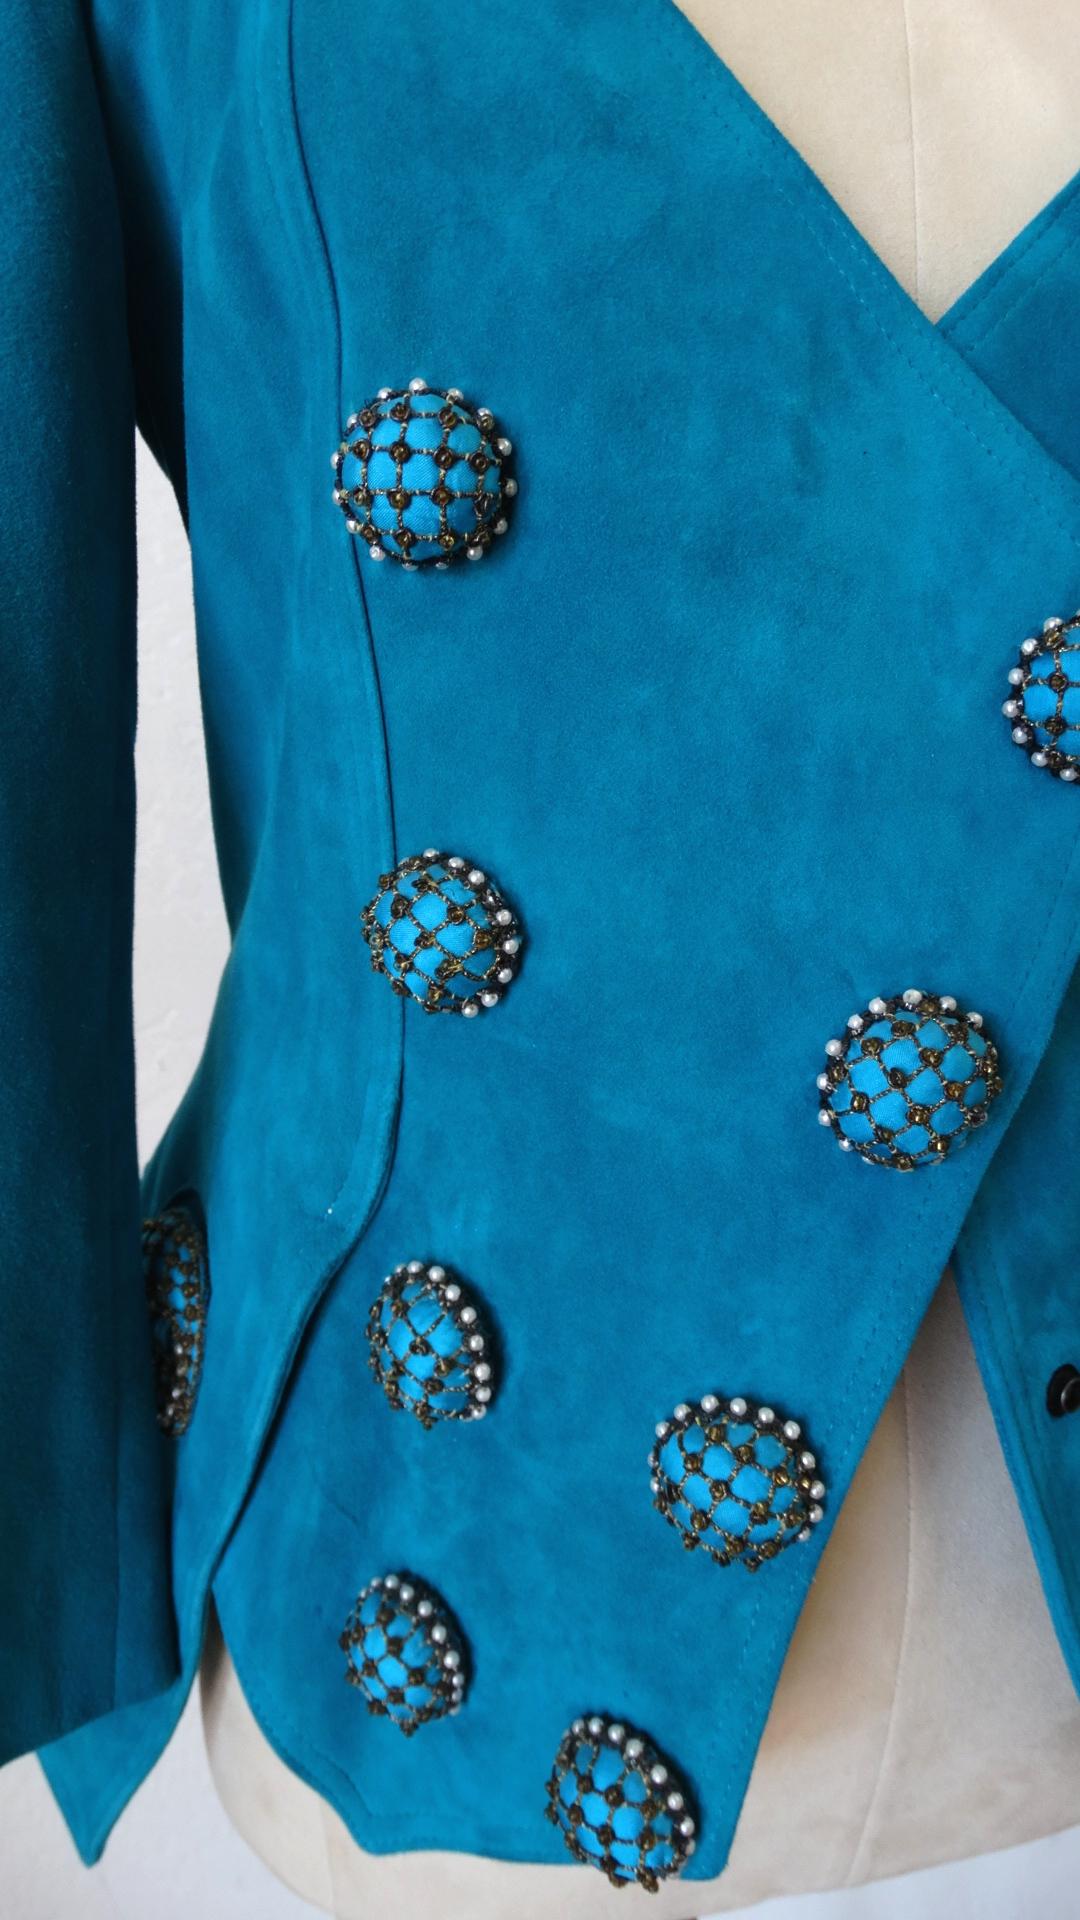 Jean Claude Jitrois 1980s Embellished Teal Leather Blazer In Good Condition For Sale In Scottsdale, AZ